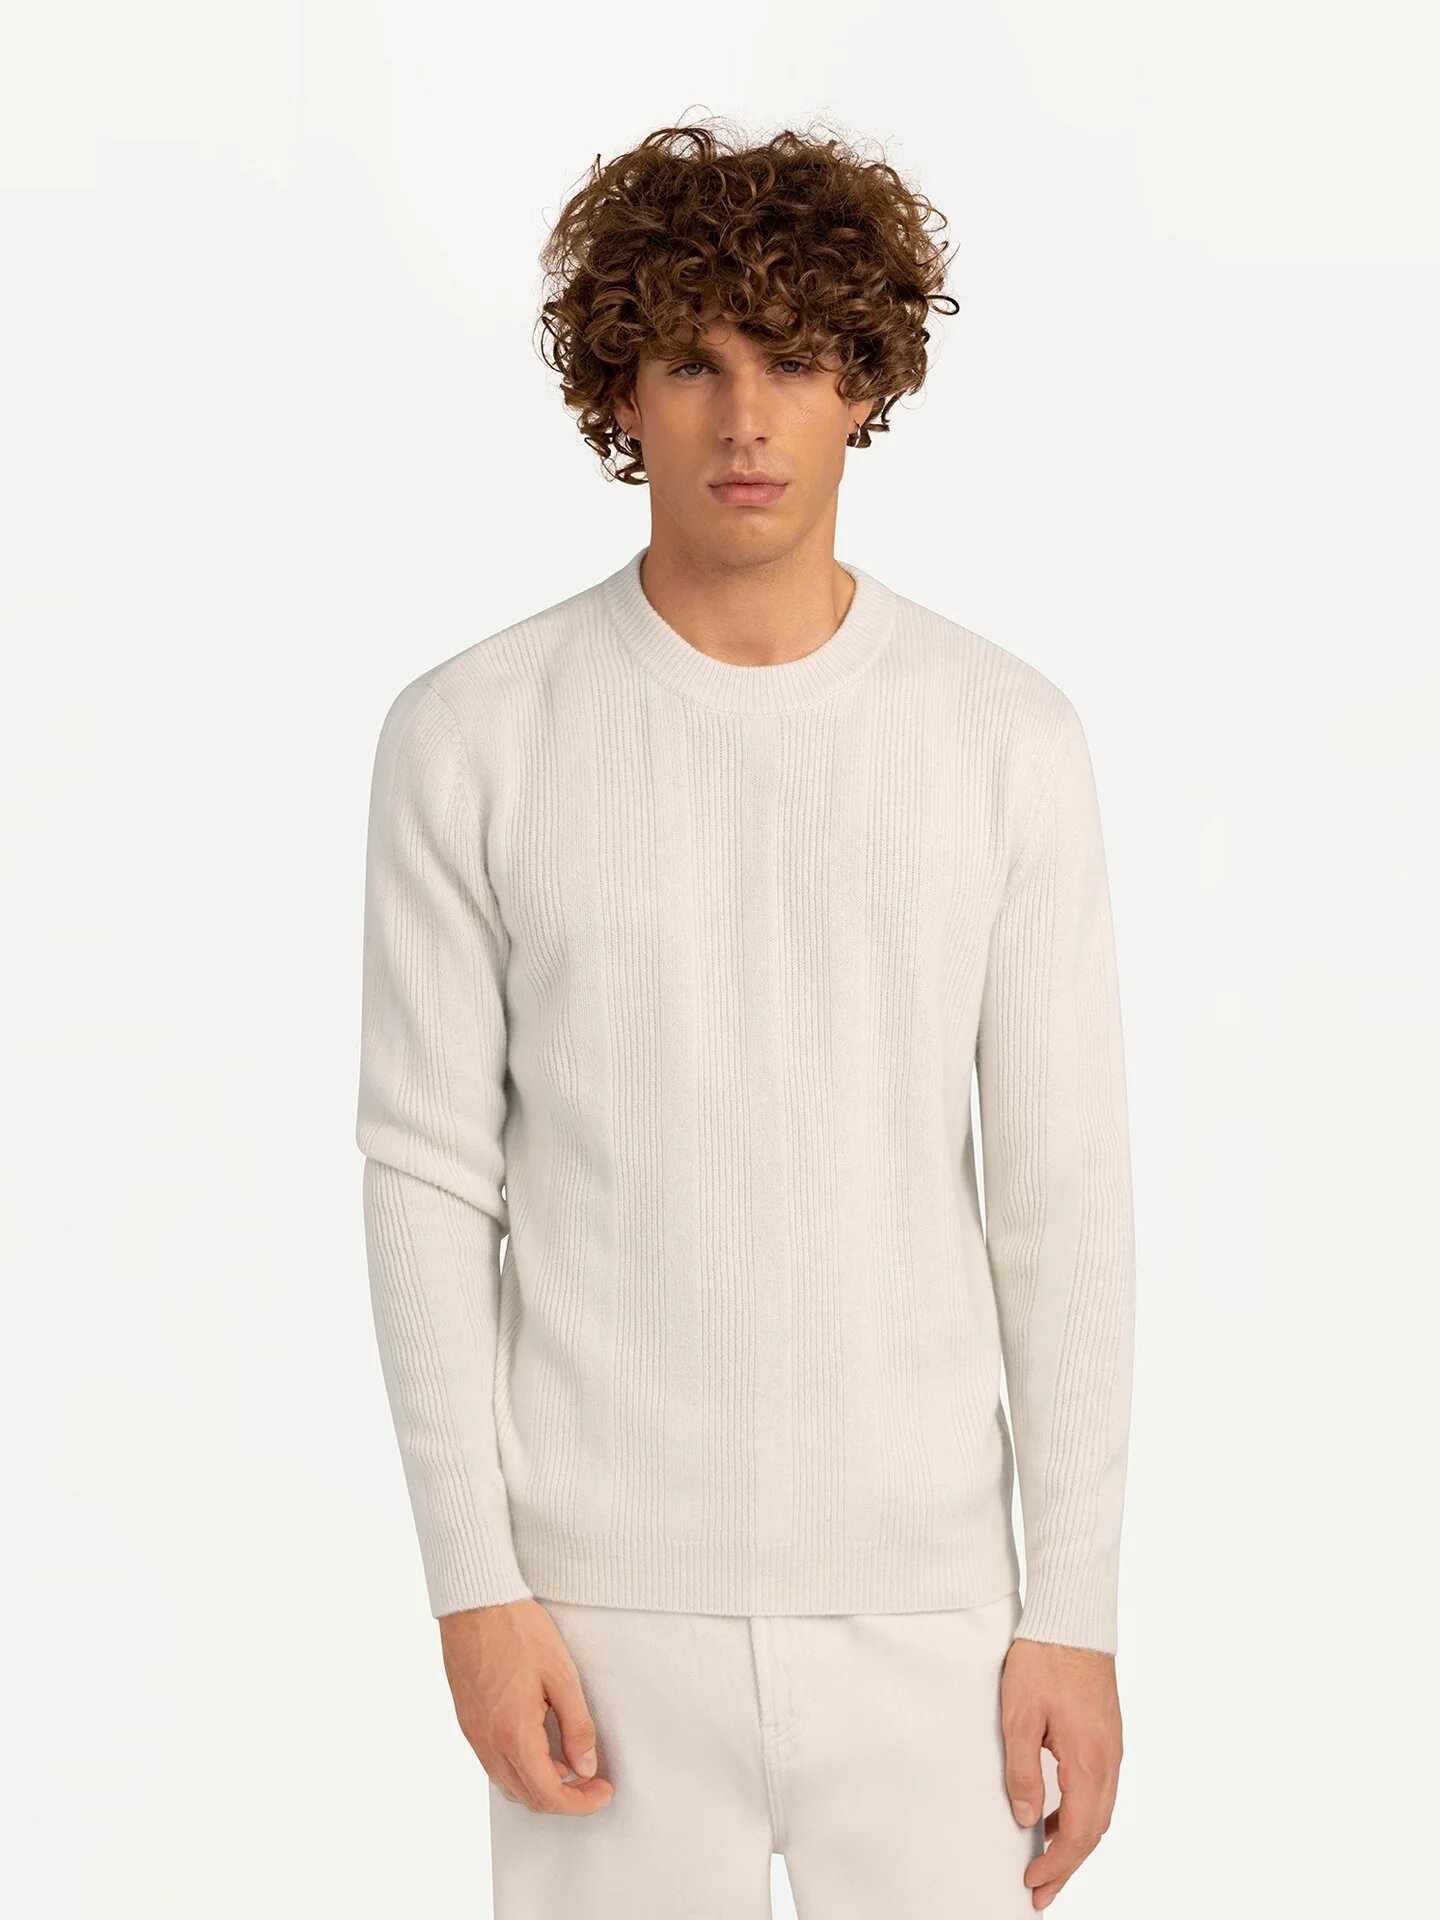 Up to 10% Off Vertical-Striped Sweater